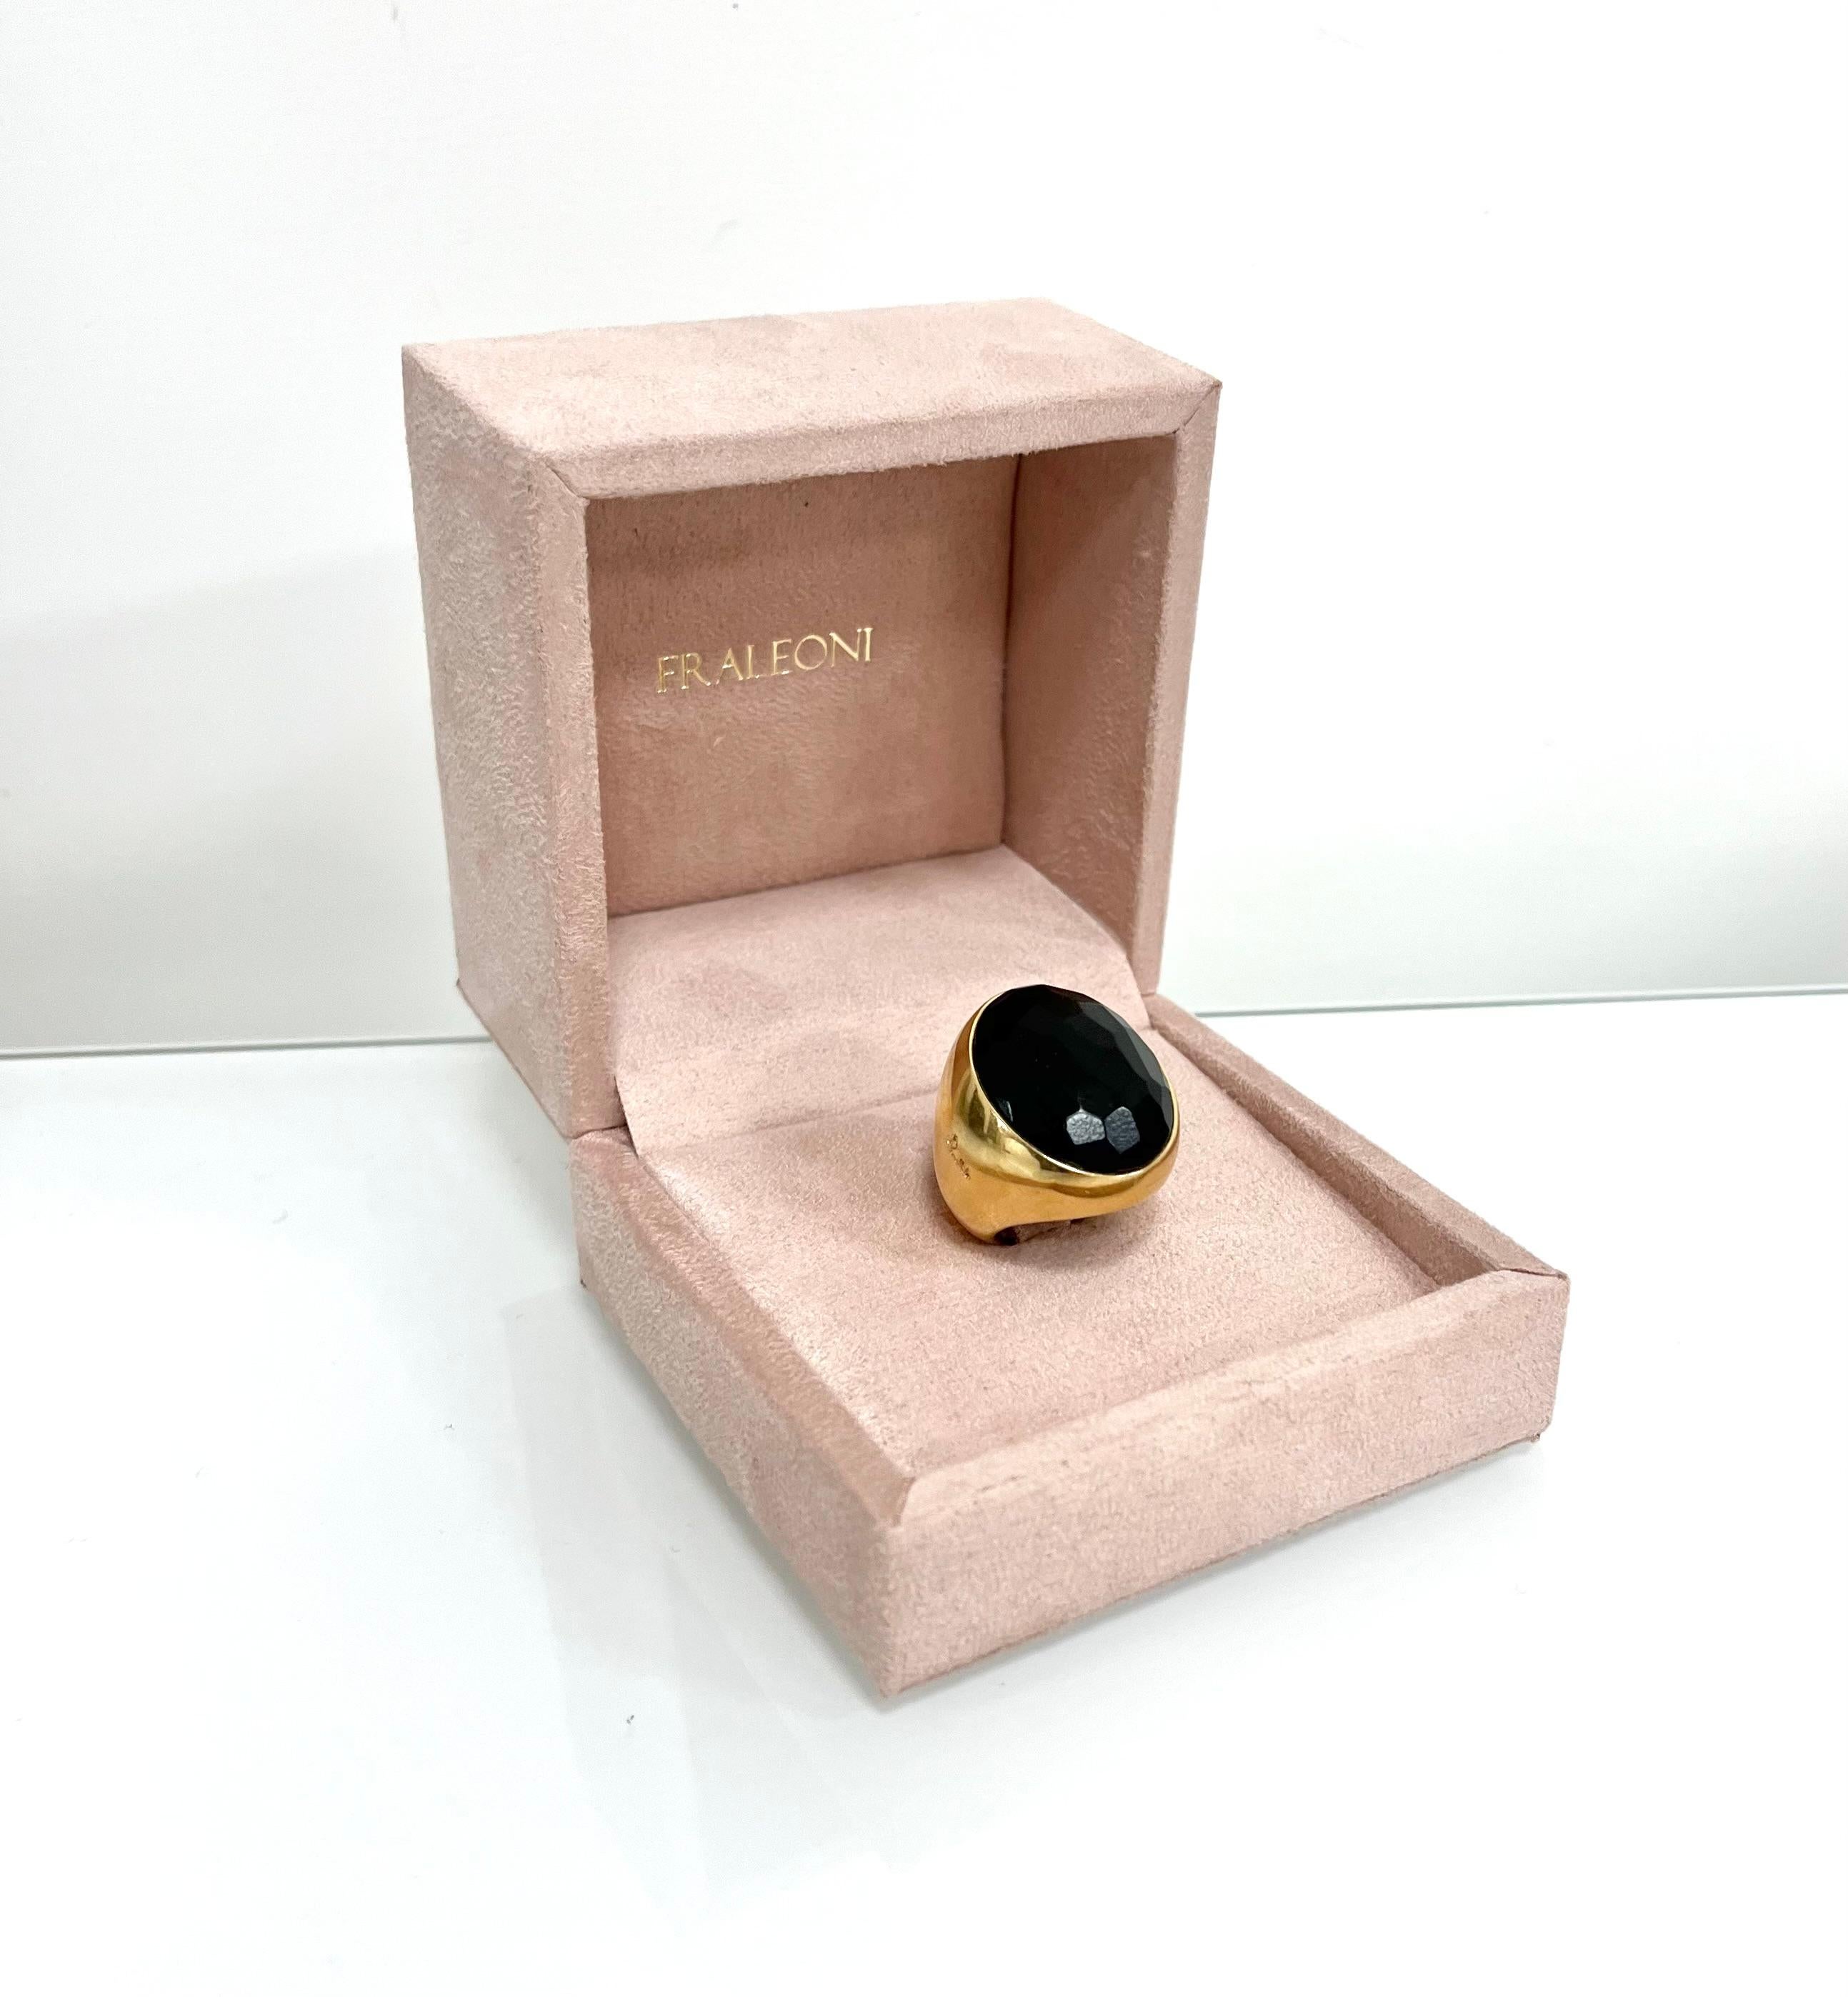 Pomellato Victoria 18 kt. yellow gold cocktail ring.
This iconic design is signed by Pomellato.
The ring is featured by a multifaceted black jet stone.
1990 ca.
Ring size: 5.50
Weight: gr. 35.50
The ring is not resizable.